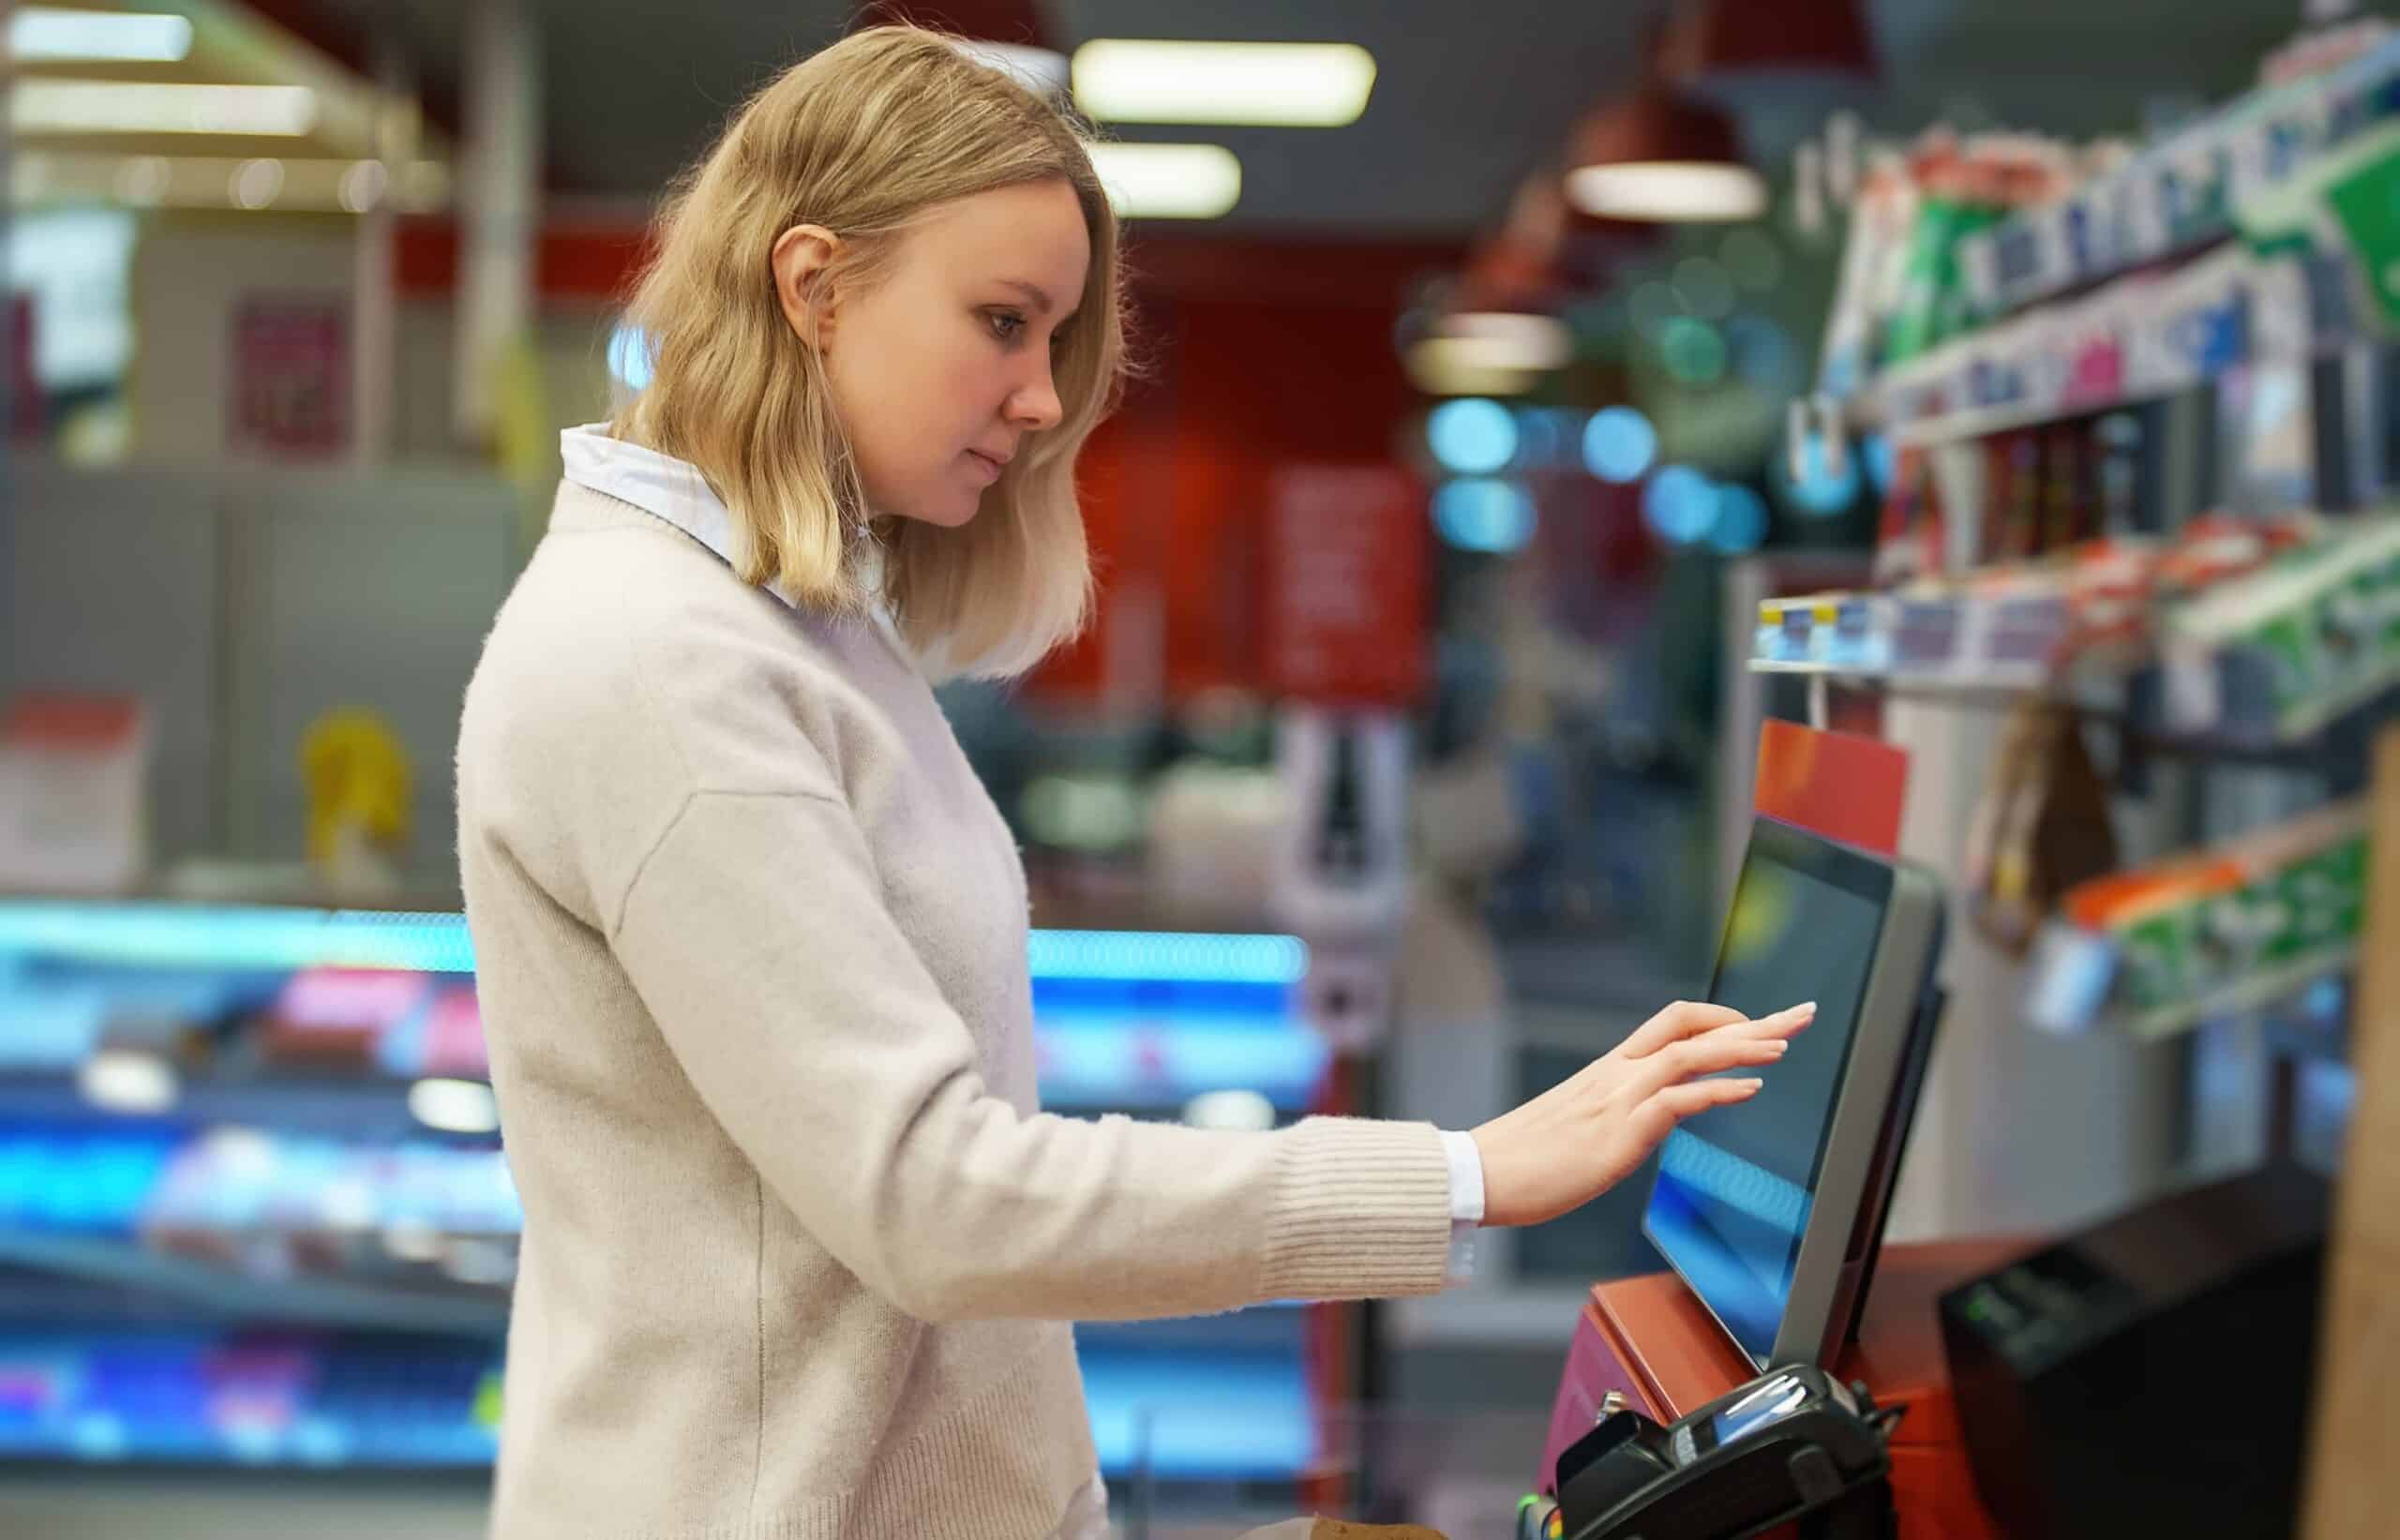 Transform Convenience Stores Customer Retention And Engagement